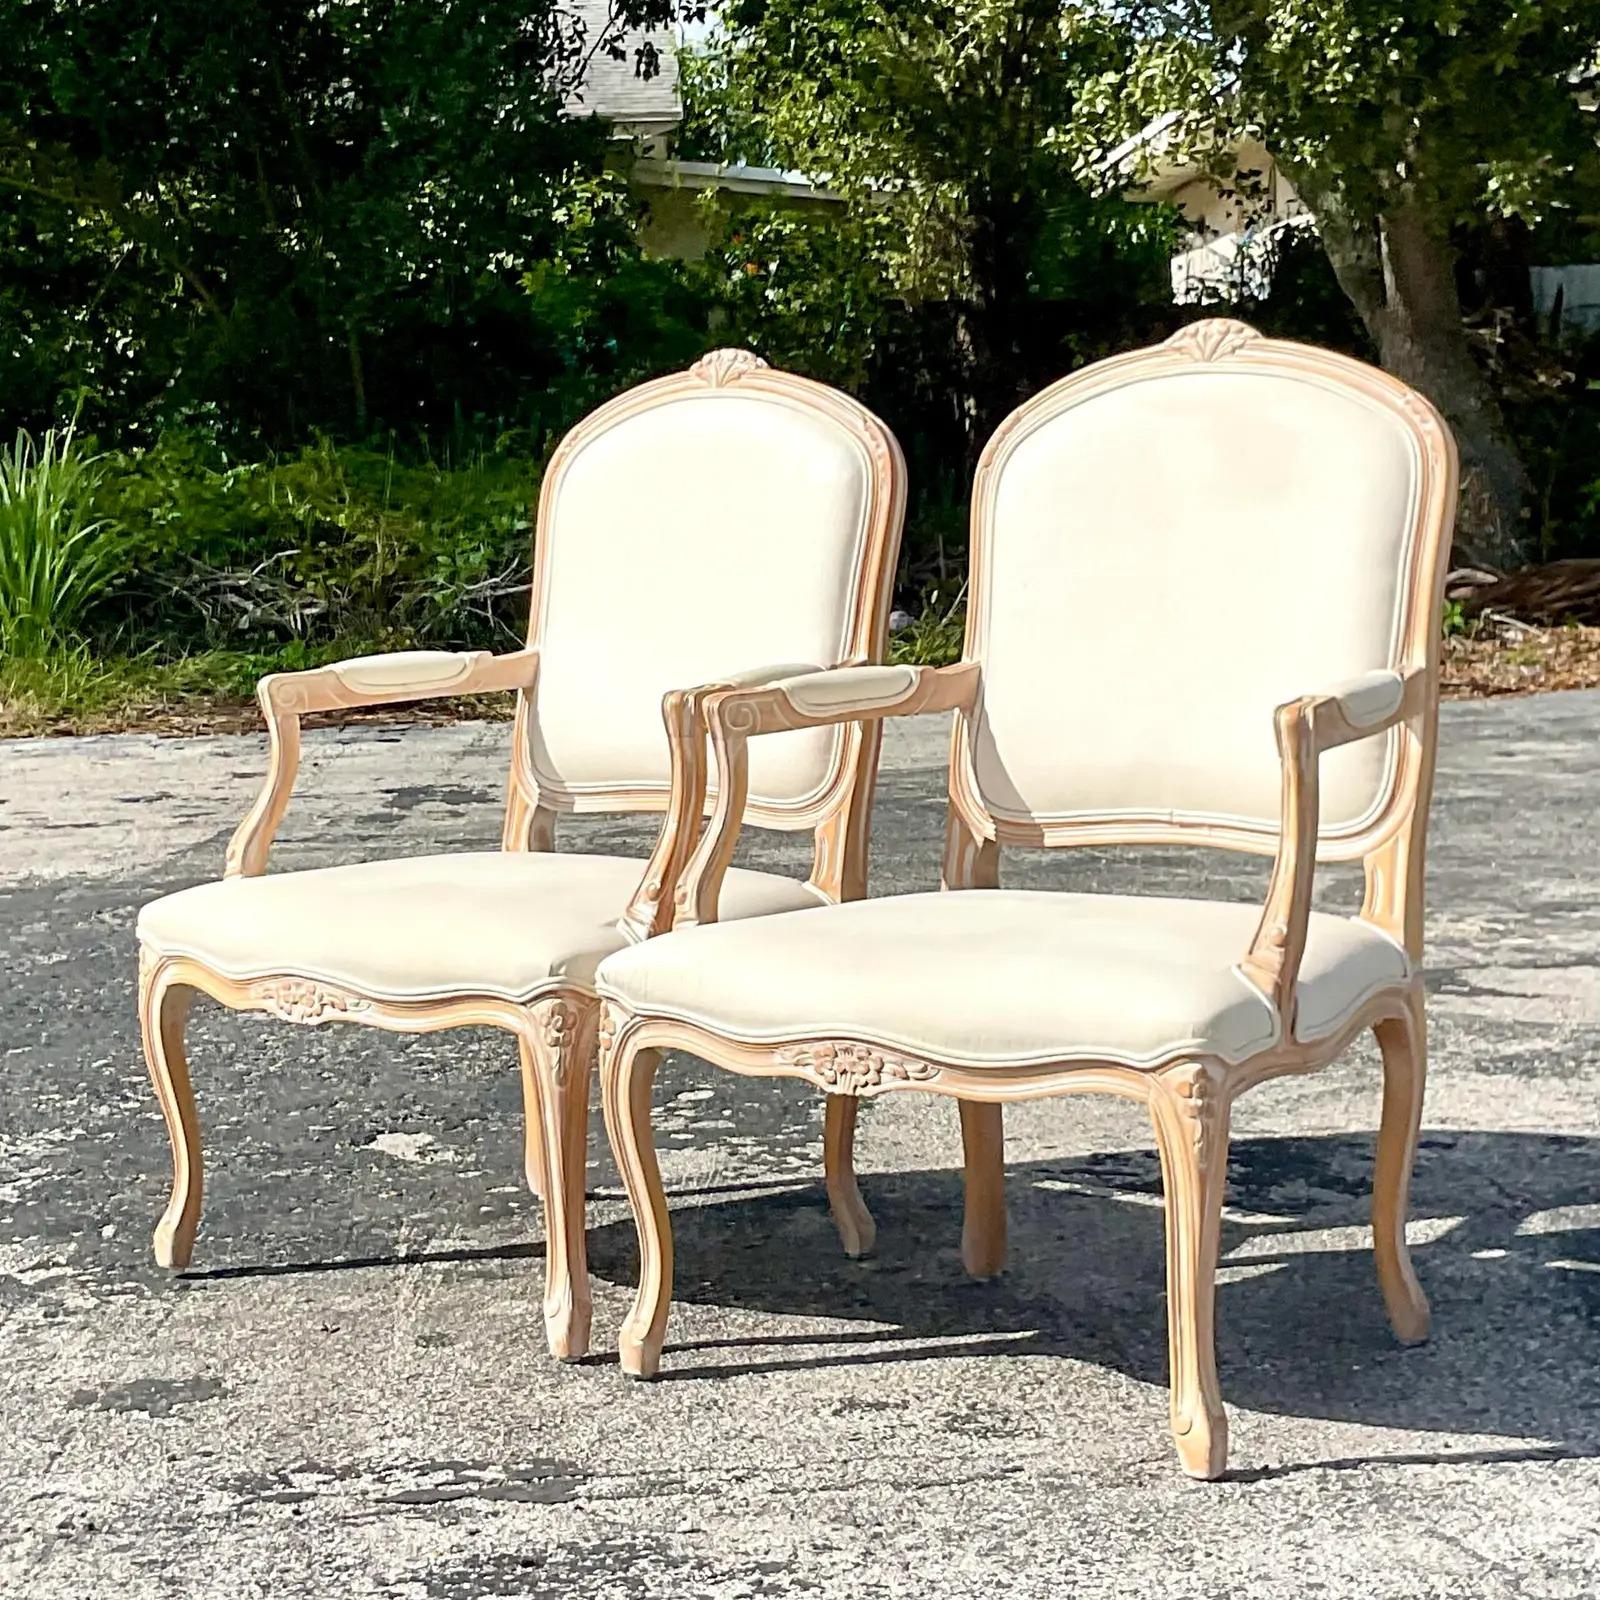 Vintage Regency Bergere Chairs - A Pair For Sale 2